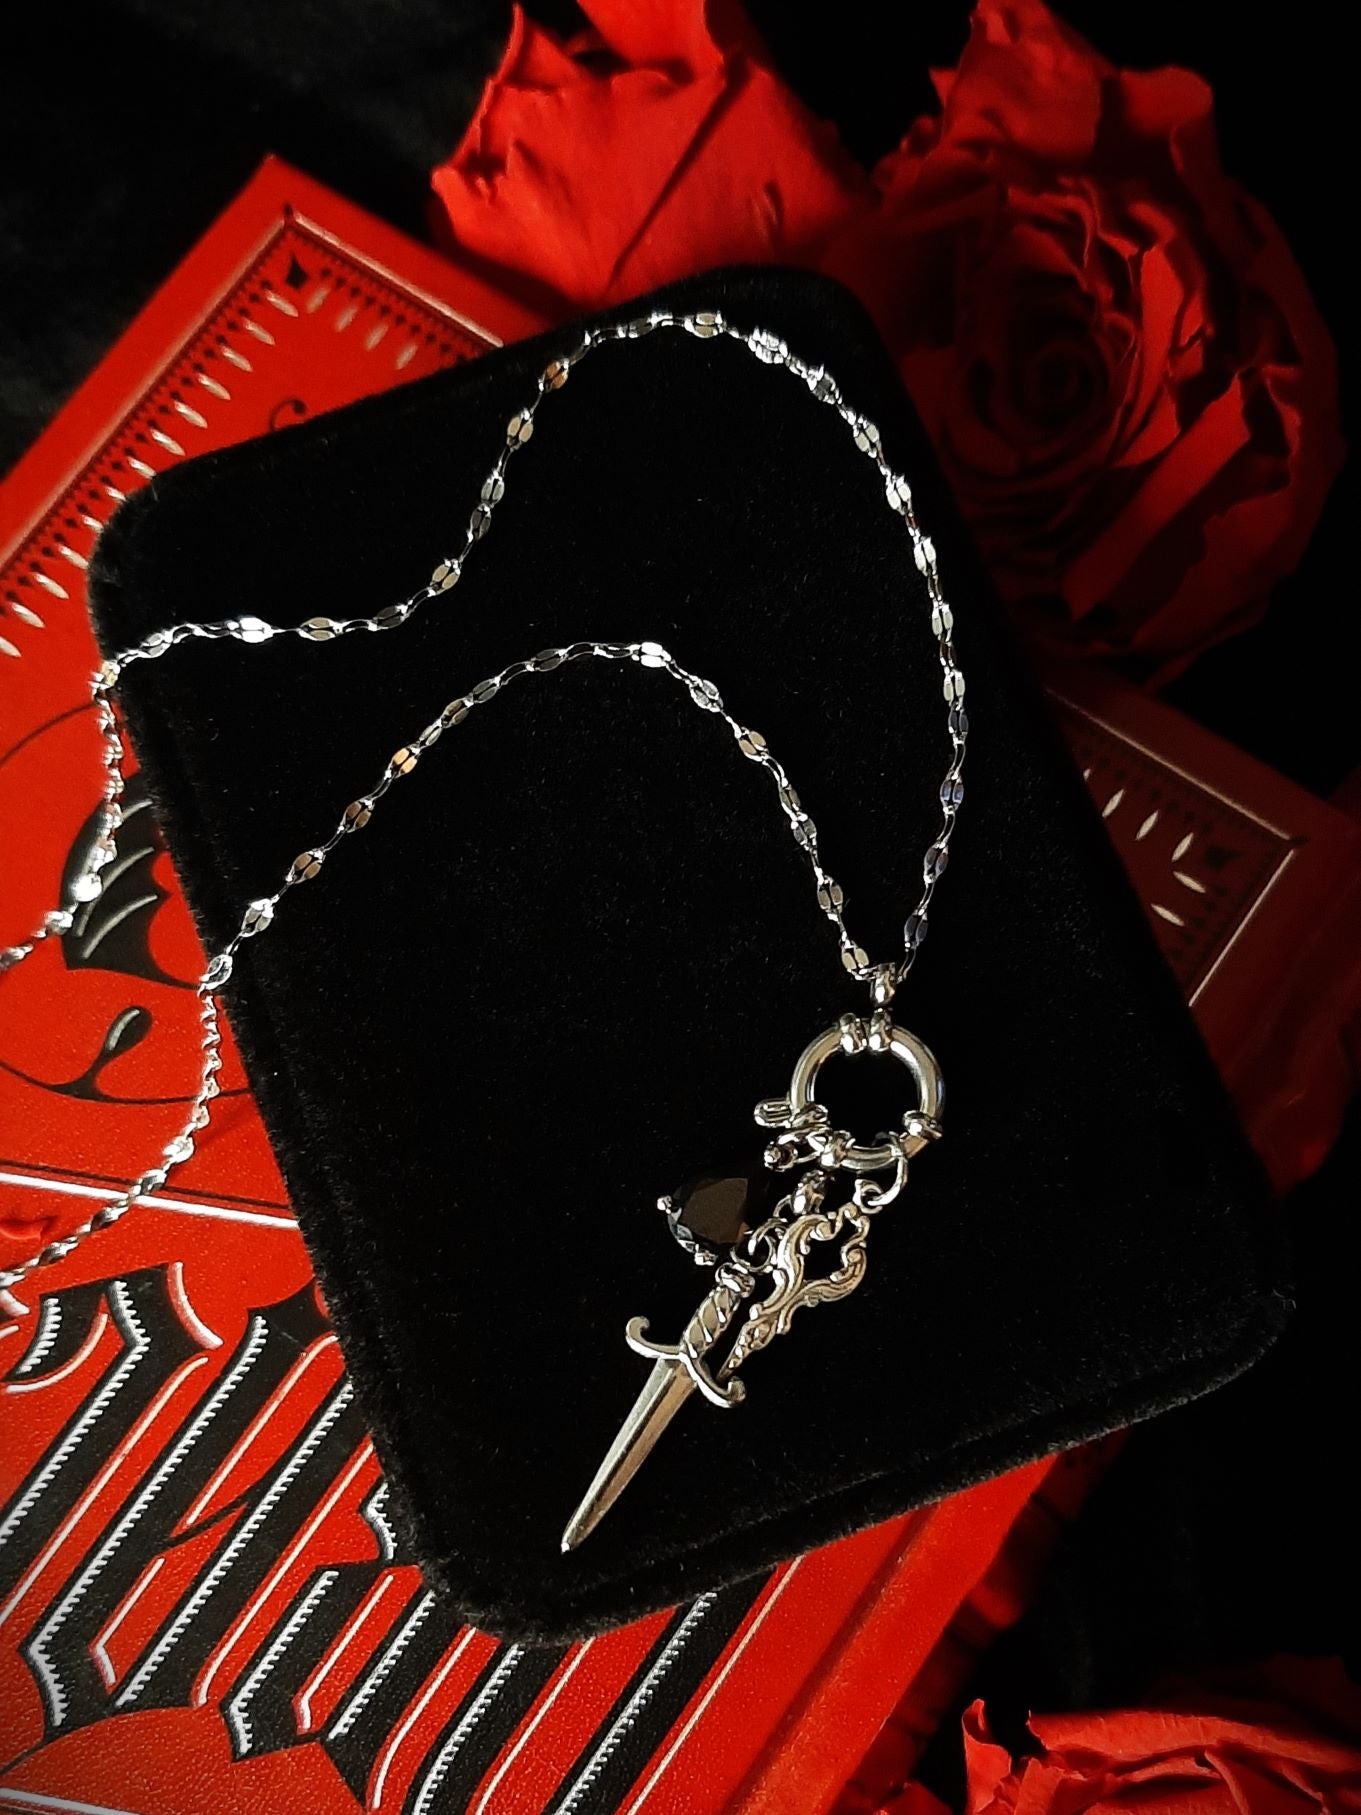 𝕰𝖒𝖕𝖗𝖊𝖘𝖘 charm necklace - Red 𝖔𝖓𝖊 𝖑𝖊𝖋𝖙 !